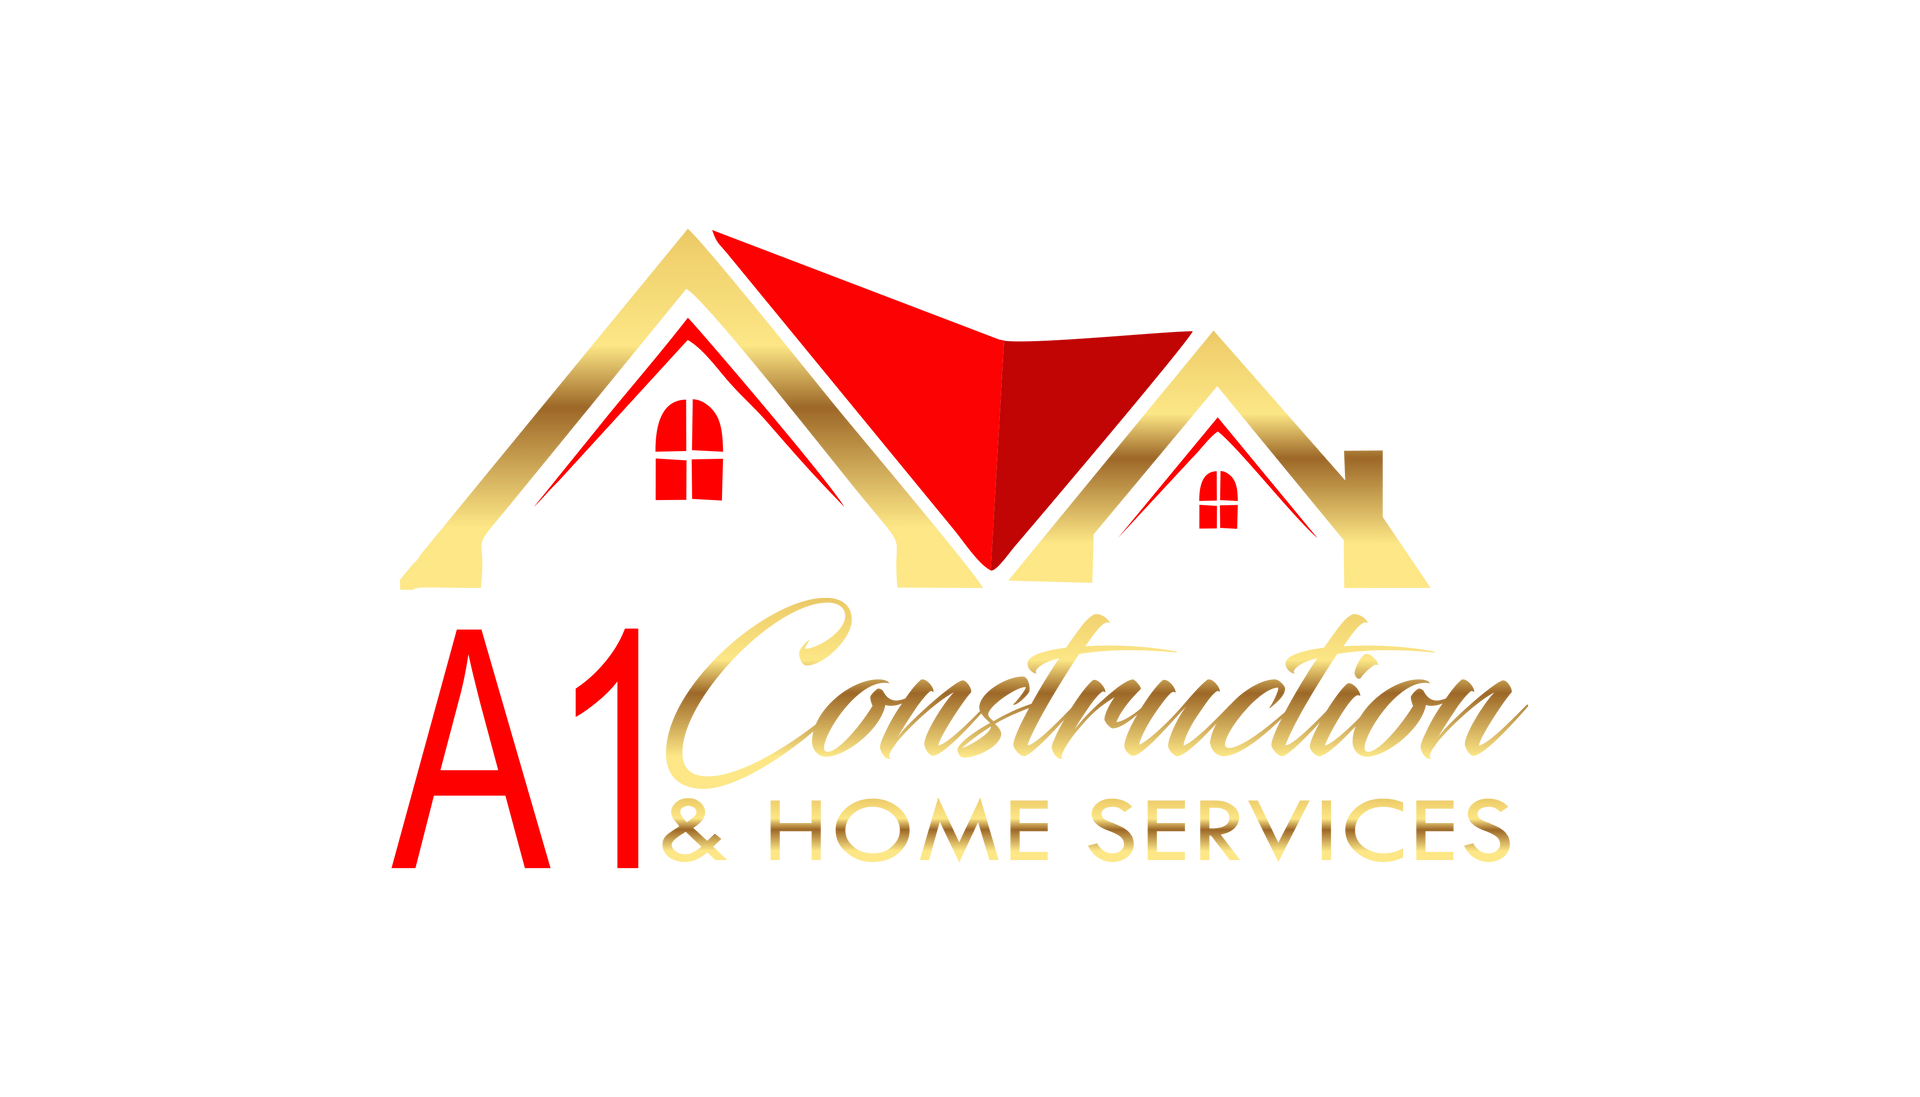 A1 CONSTRUCTION AND HOME SERVICES